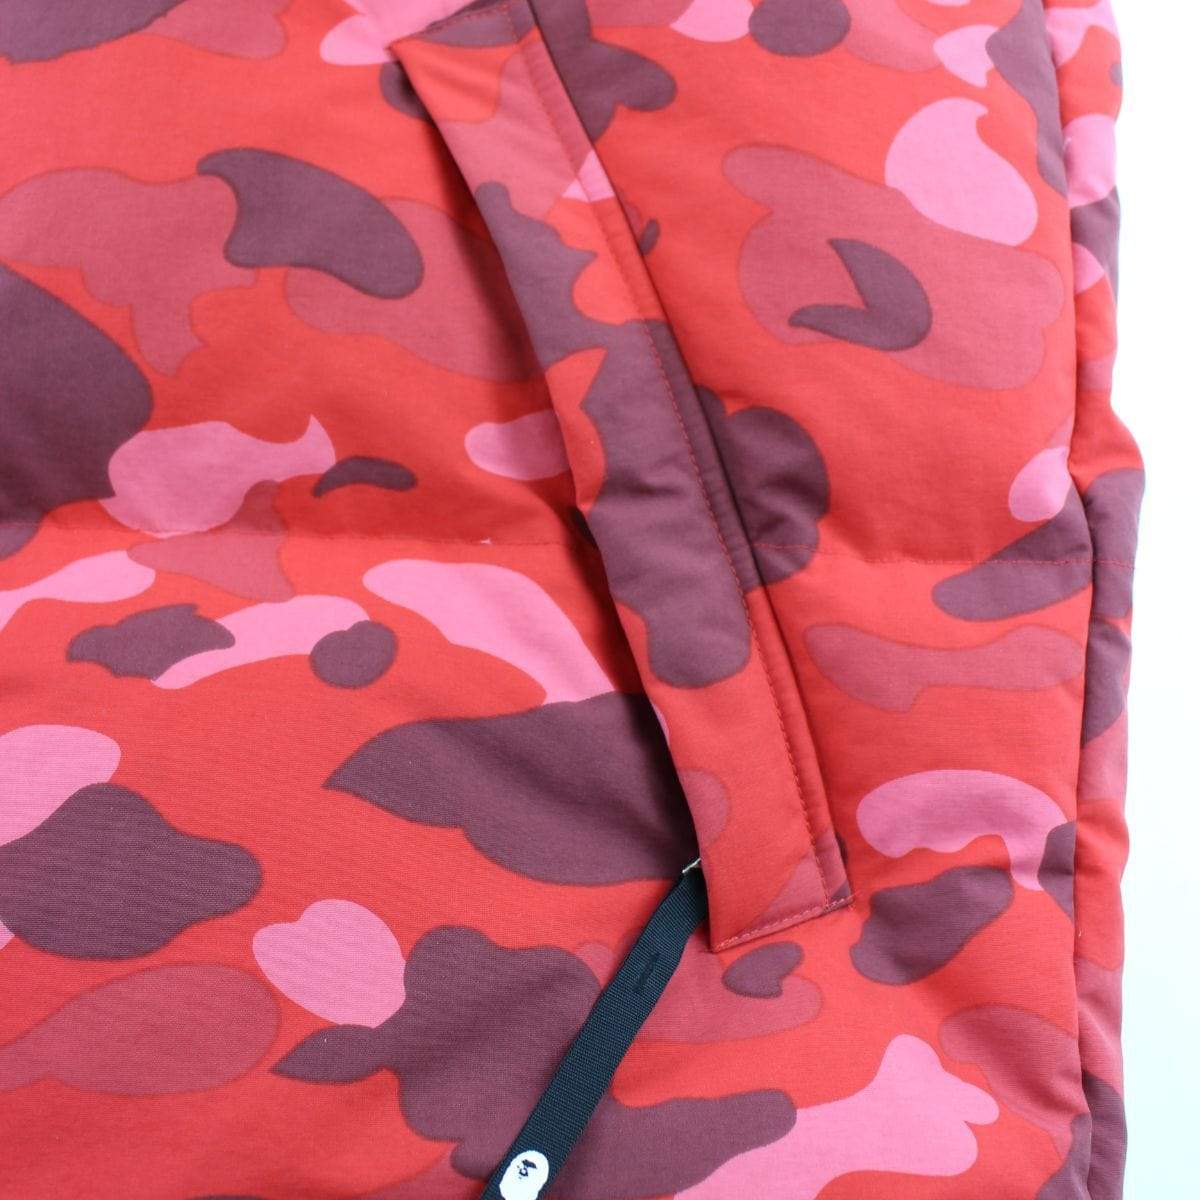 Bape Red Camo Reversible Puffer Jacket - SaruGeneral